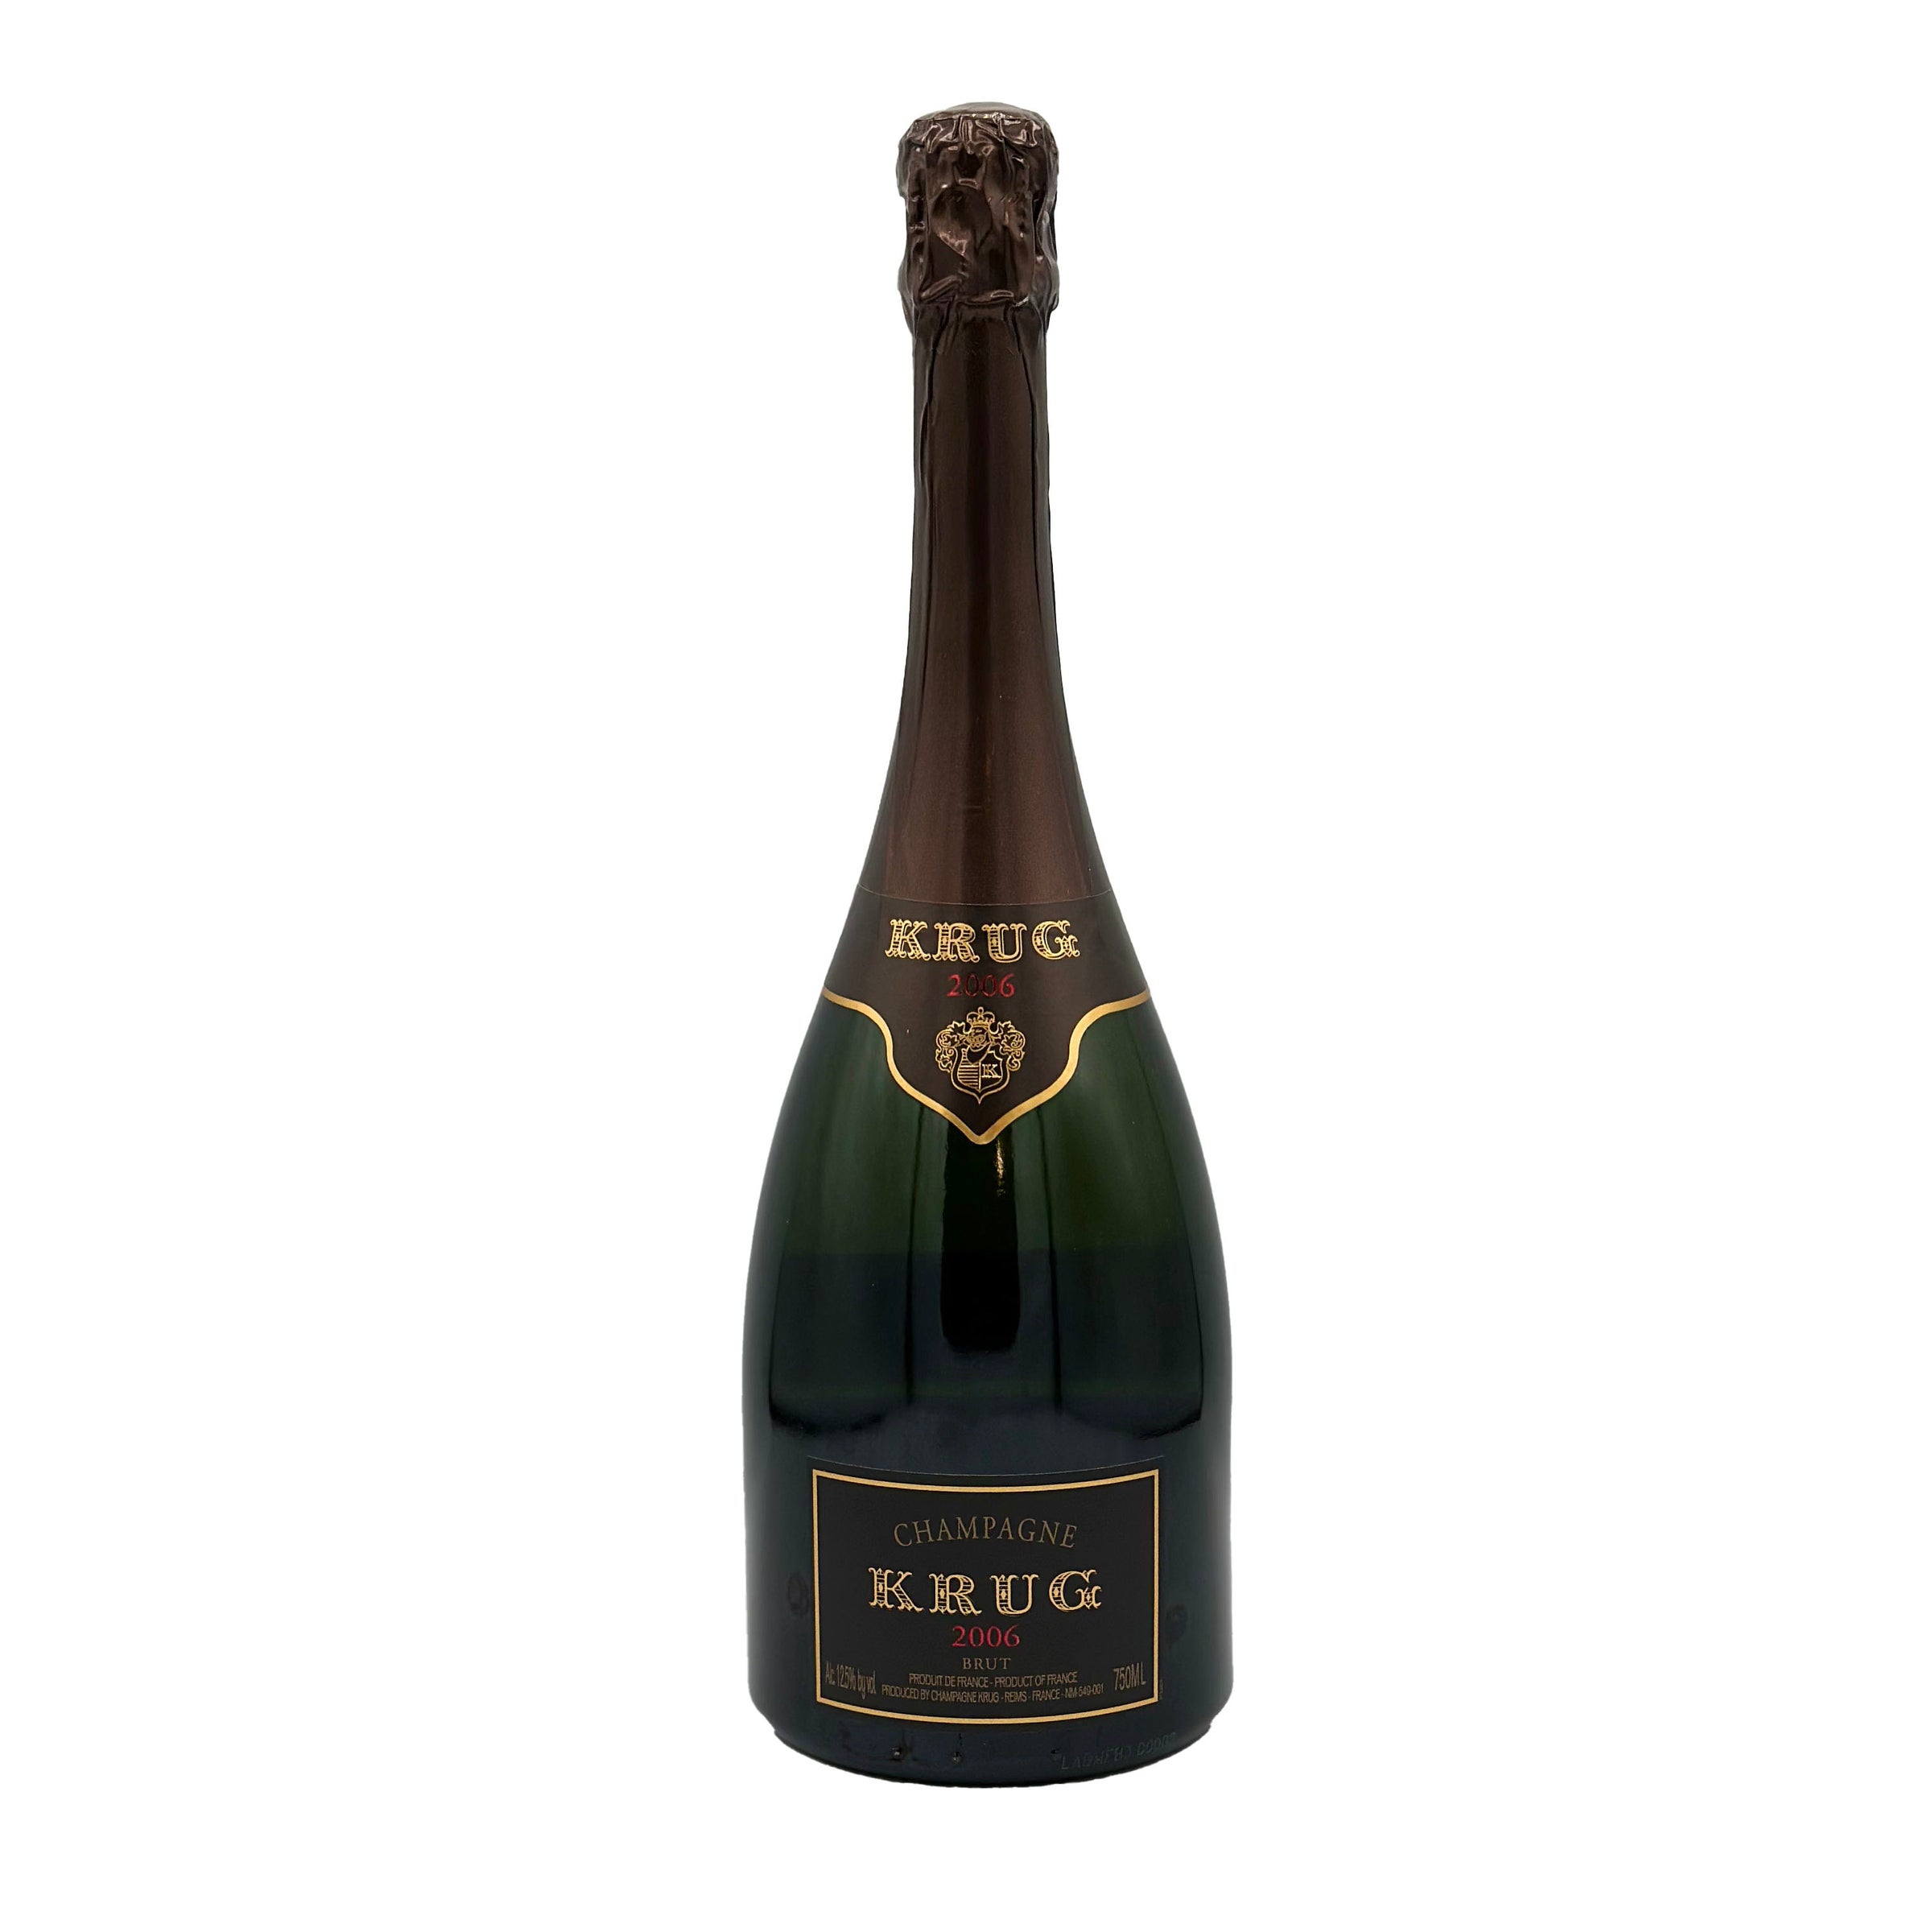 Krug Champagne - All Products